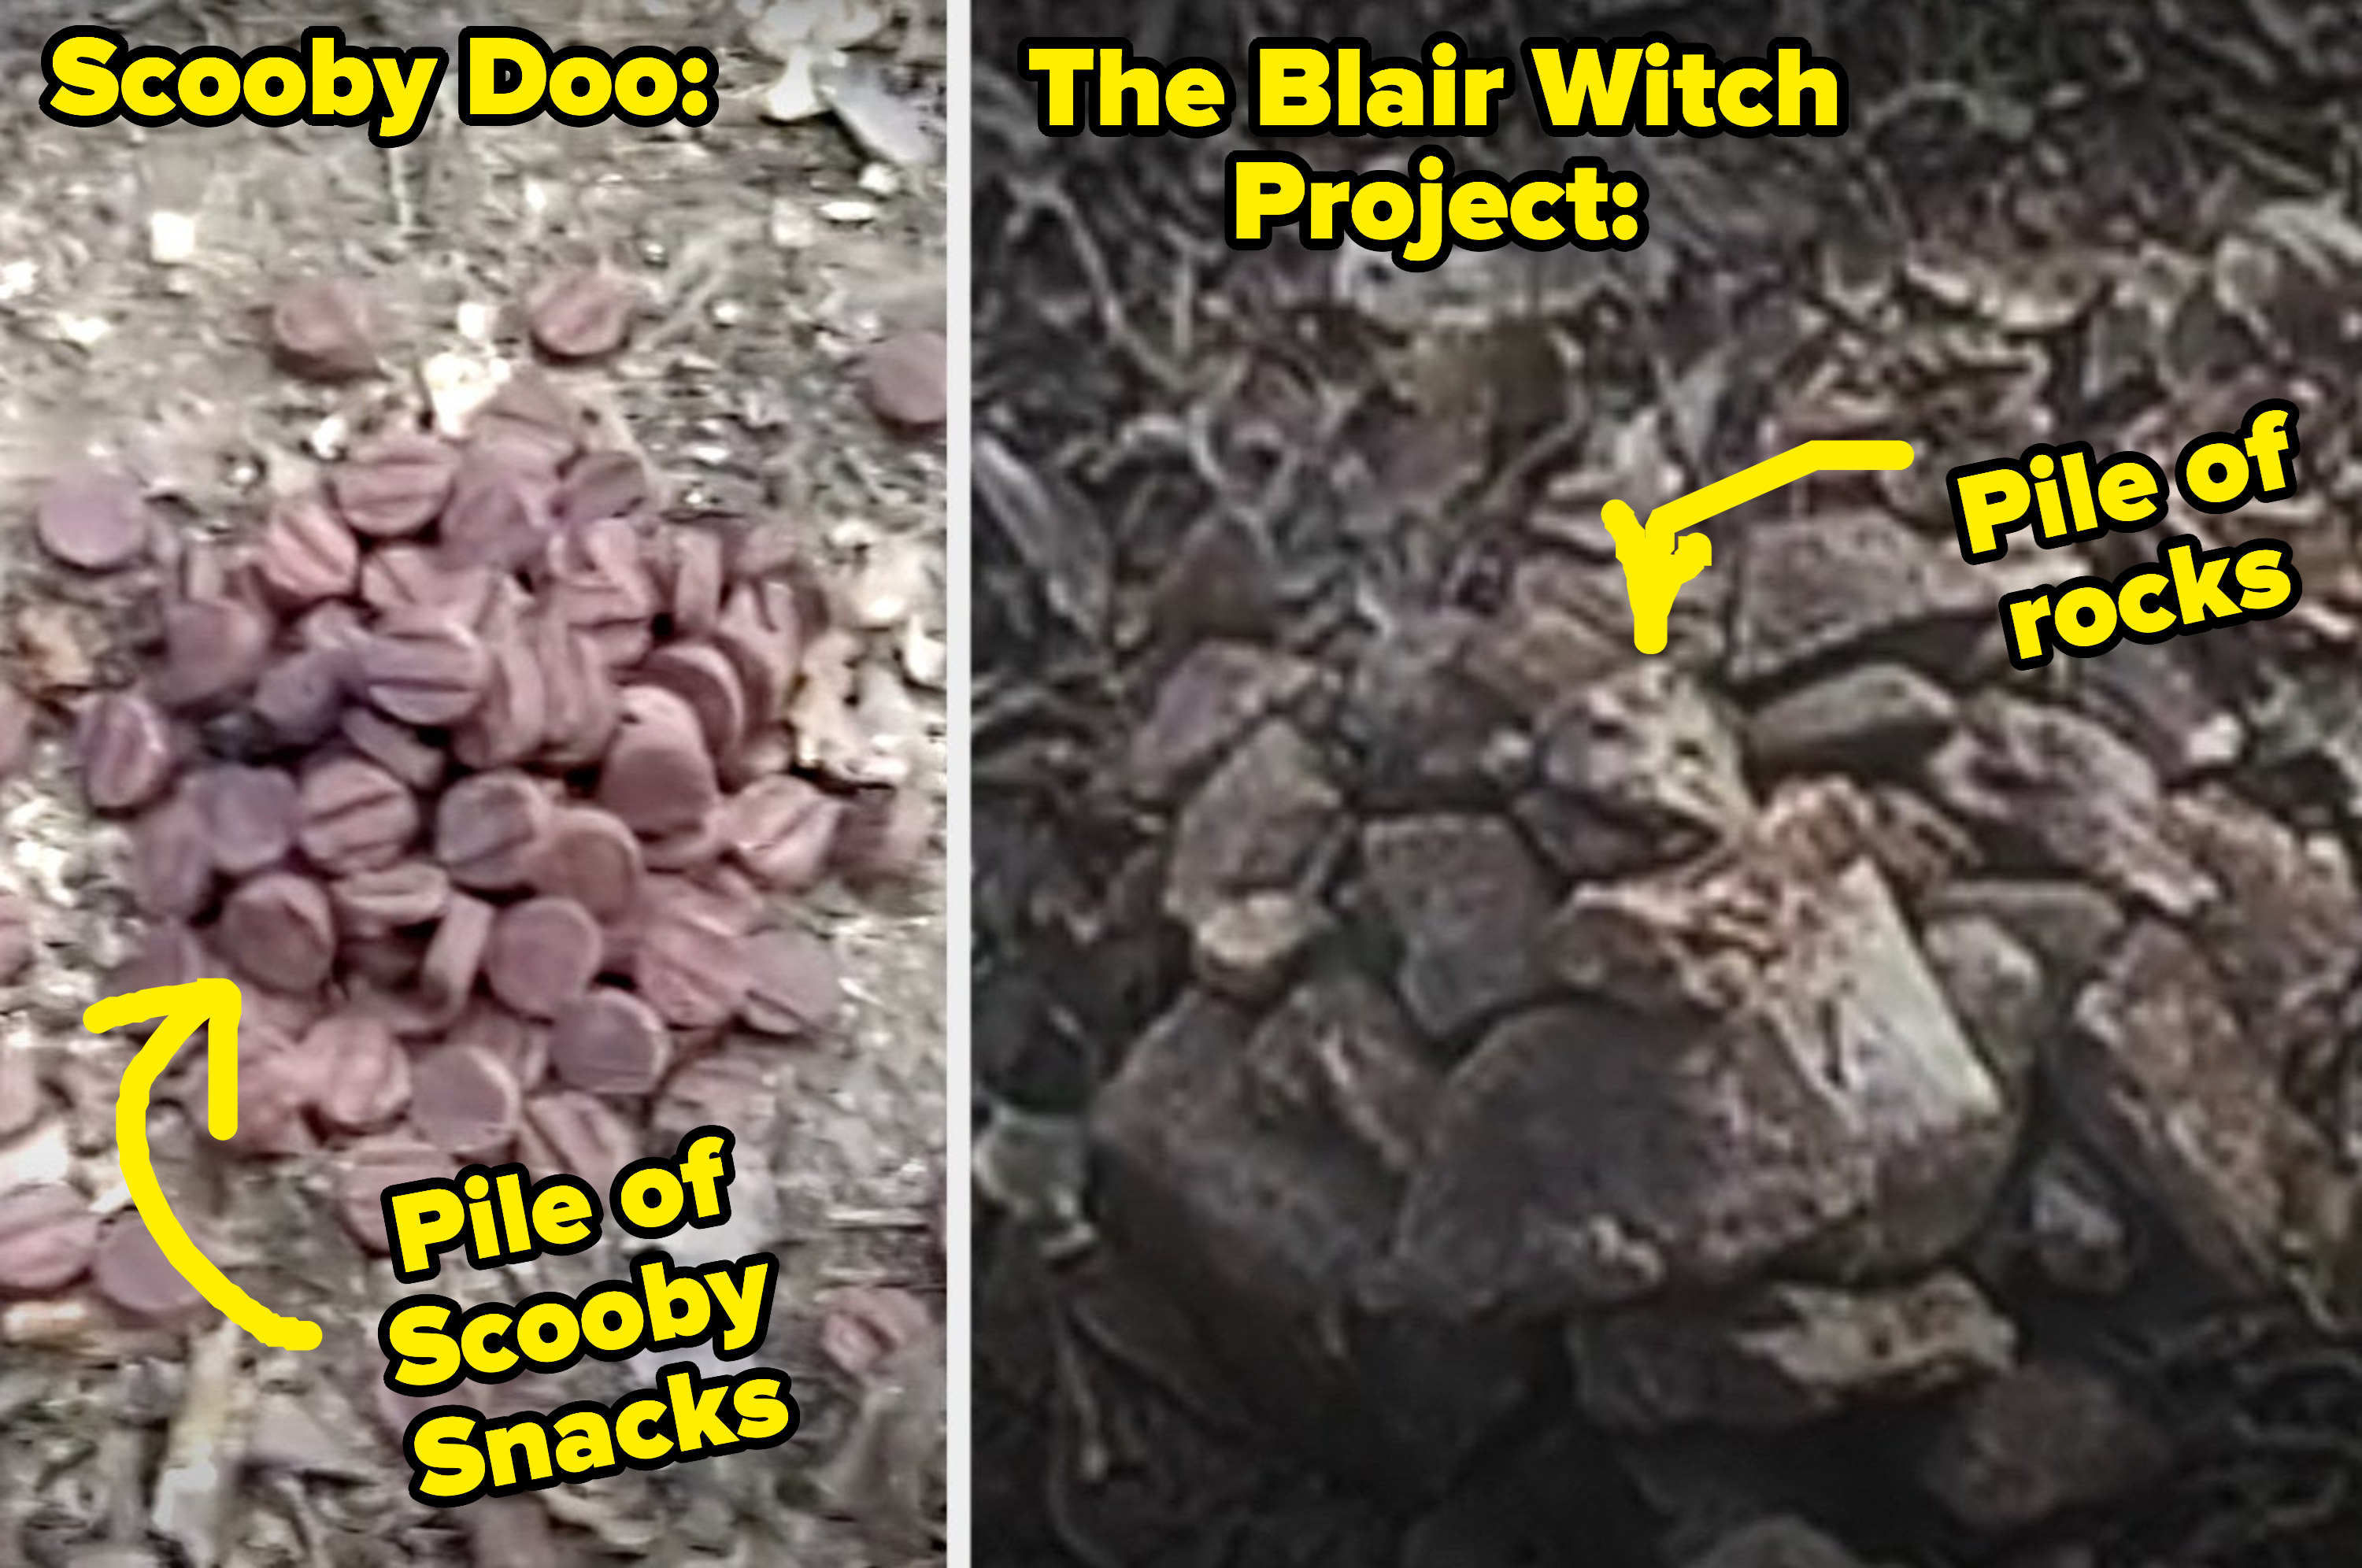 Left: A pile of Scooby Snacks on the ground Right: A pile of rocks from &quot;The Blair Witch Project&quot;